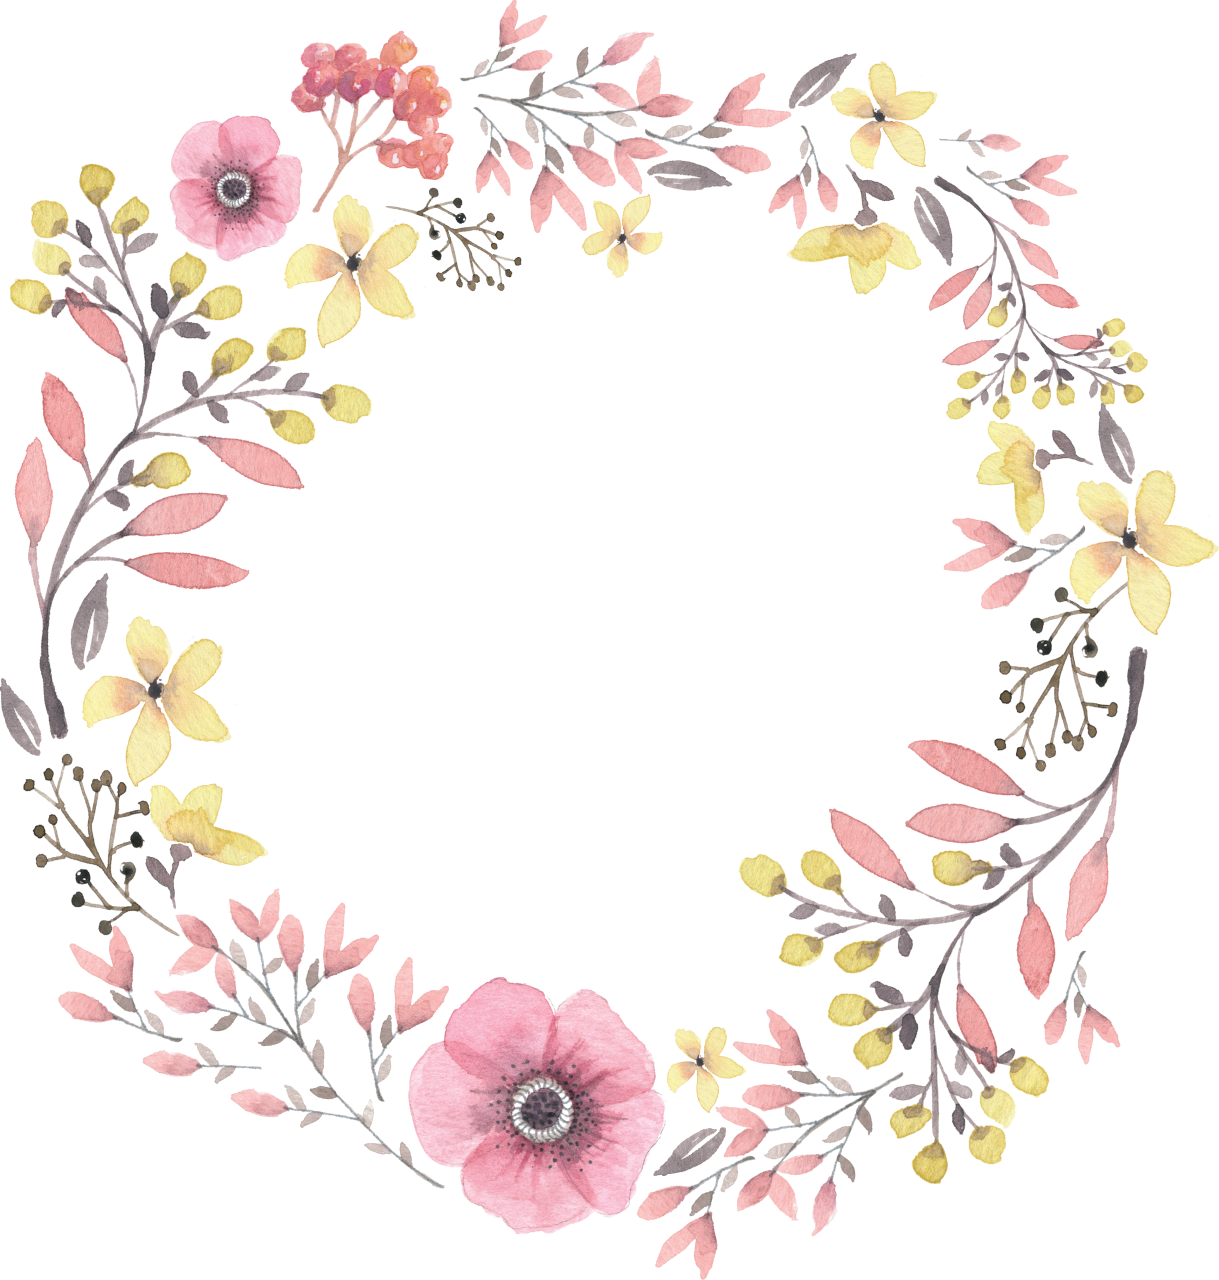 Round Flower Wreath PNG HD Image